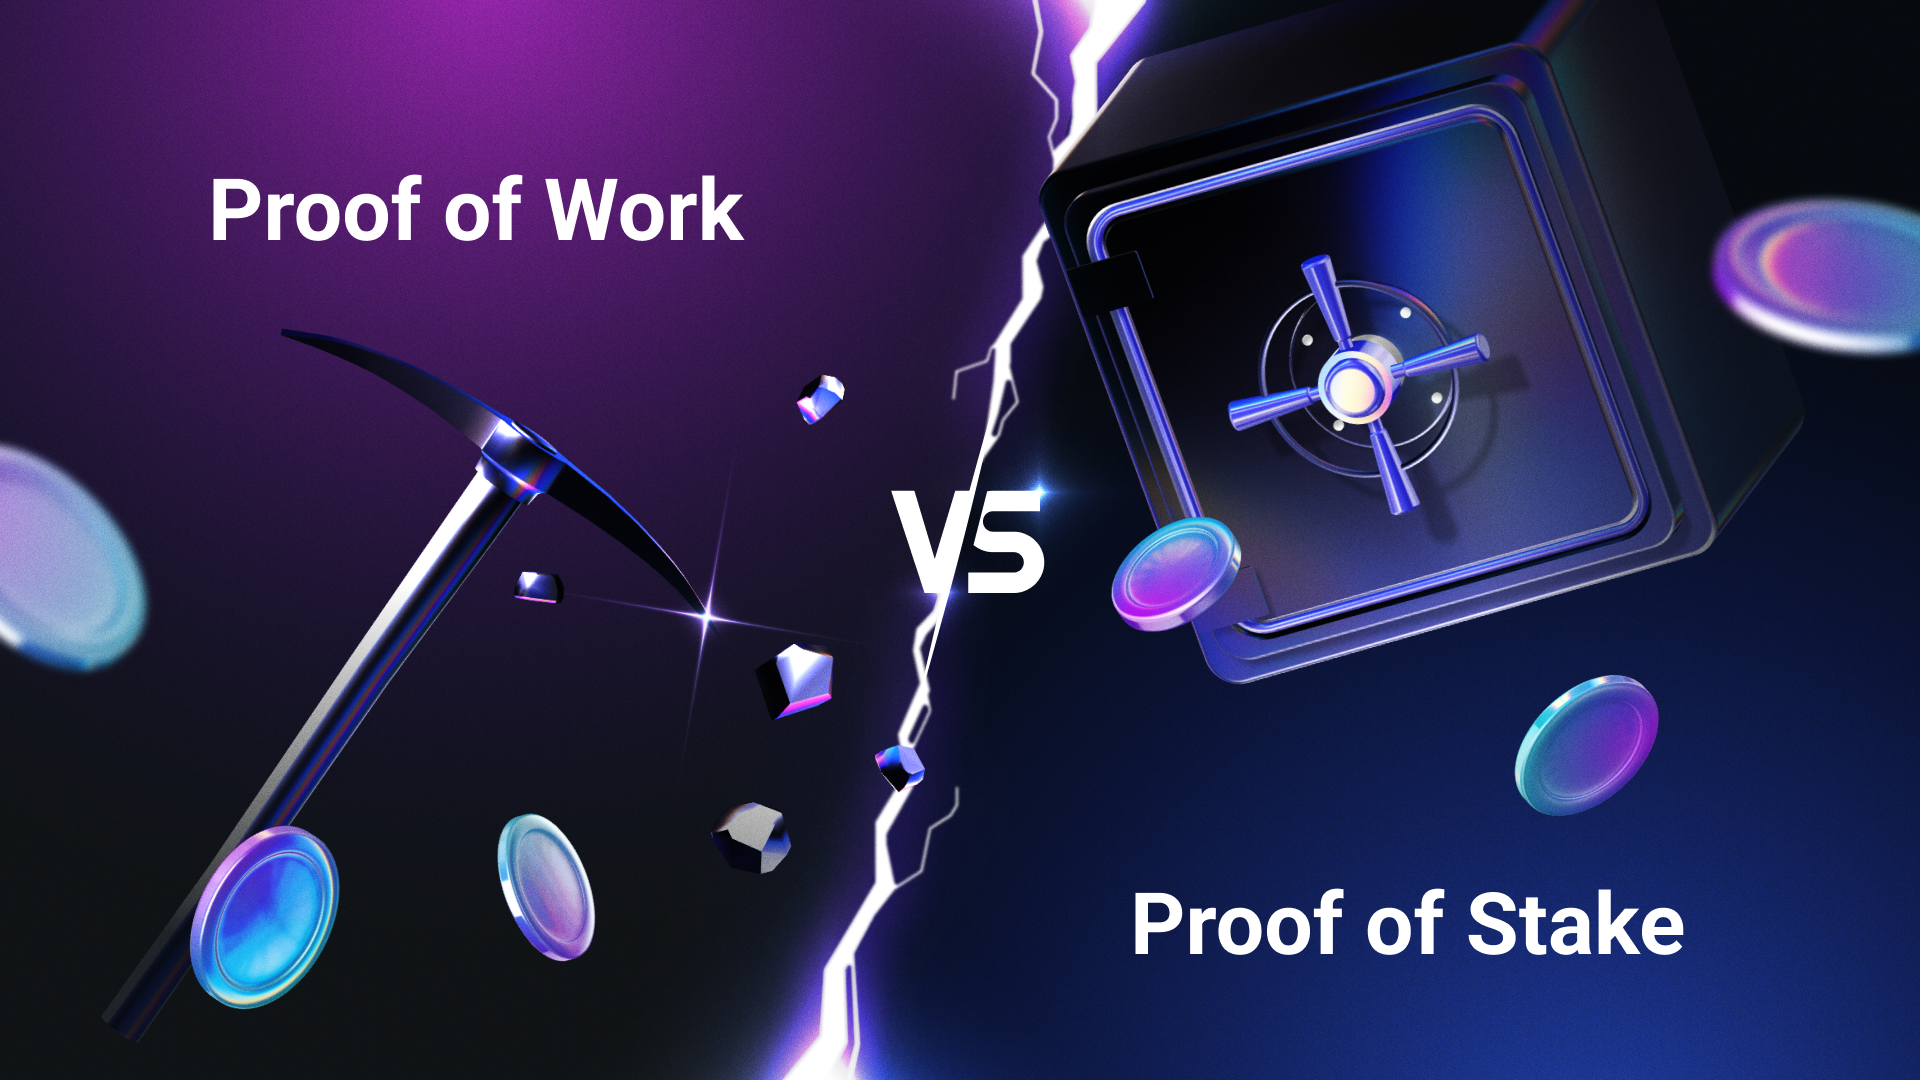 What is the difference between Proof of Work and Proof of Stake?